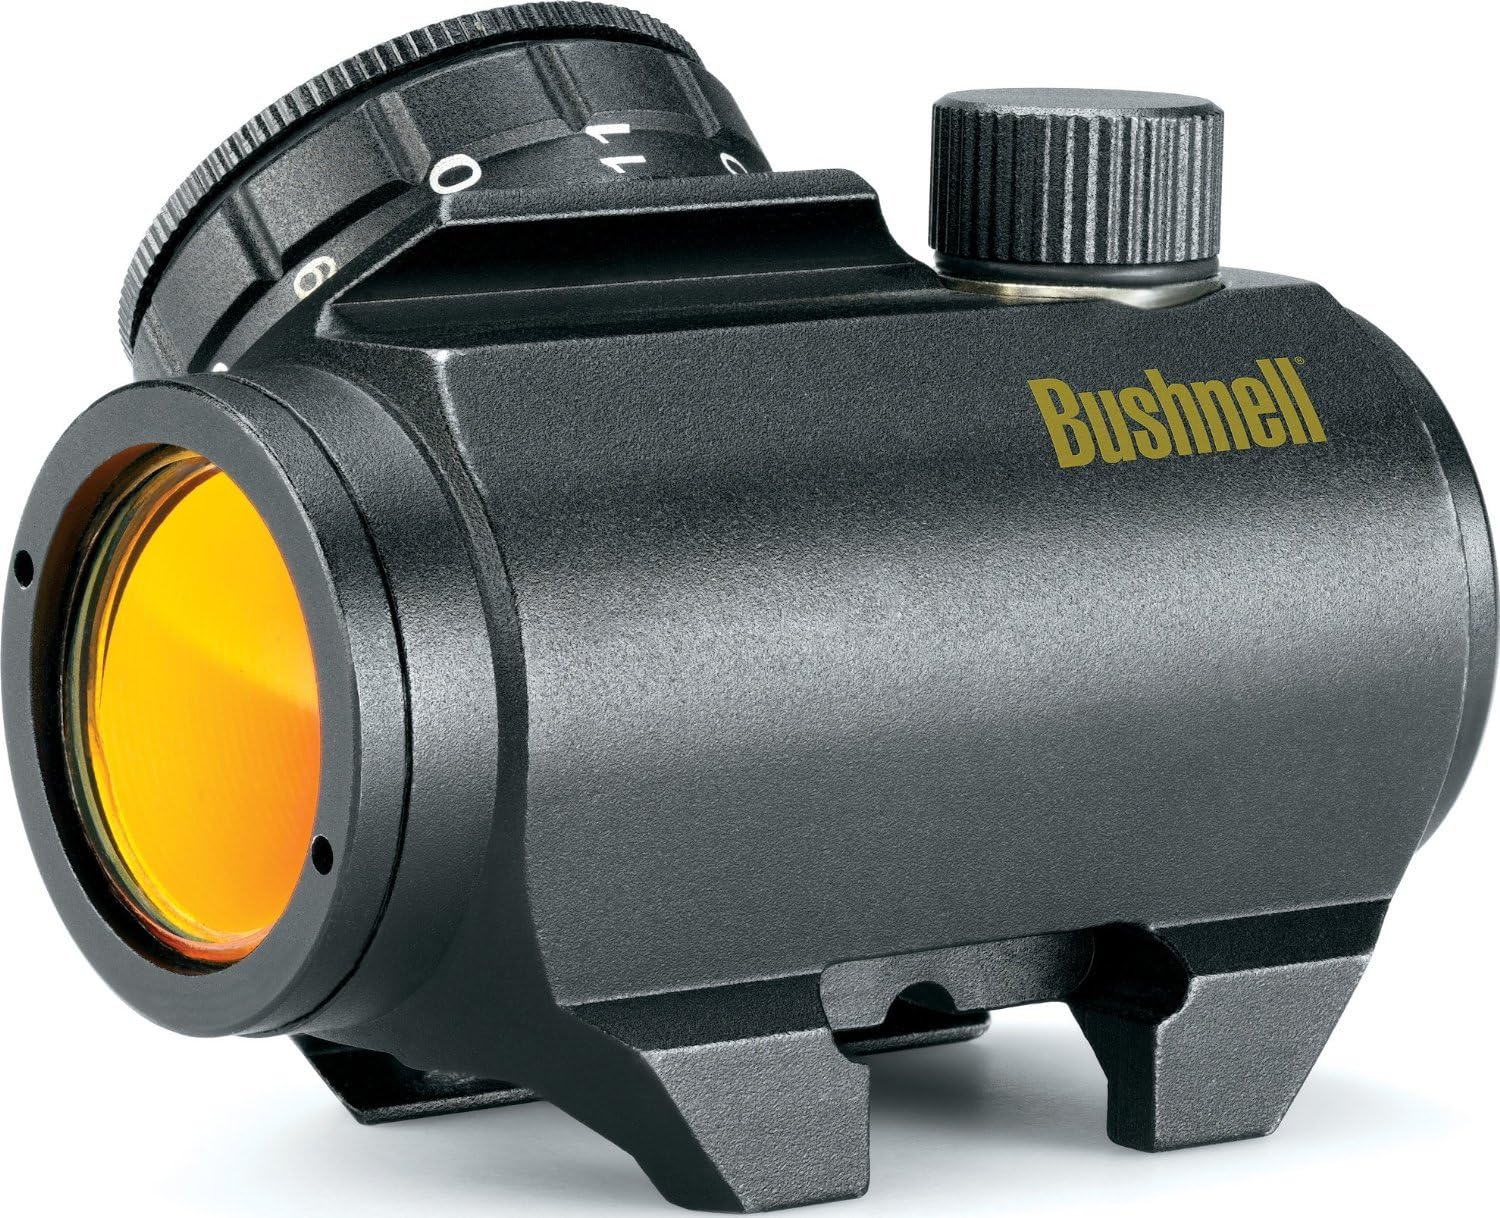 Bushnell Trophy TRS-25 Red Dot Sight Riflescope, 1x20mm, Black - Bushnell Trophy TRS-25 Red Dot Sight Riflescope Review